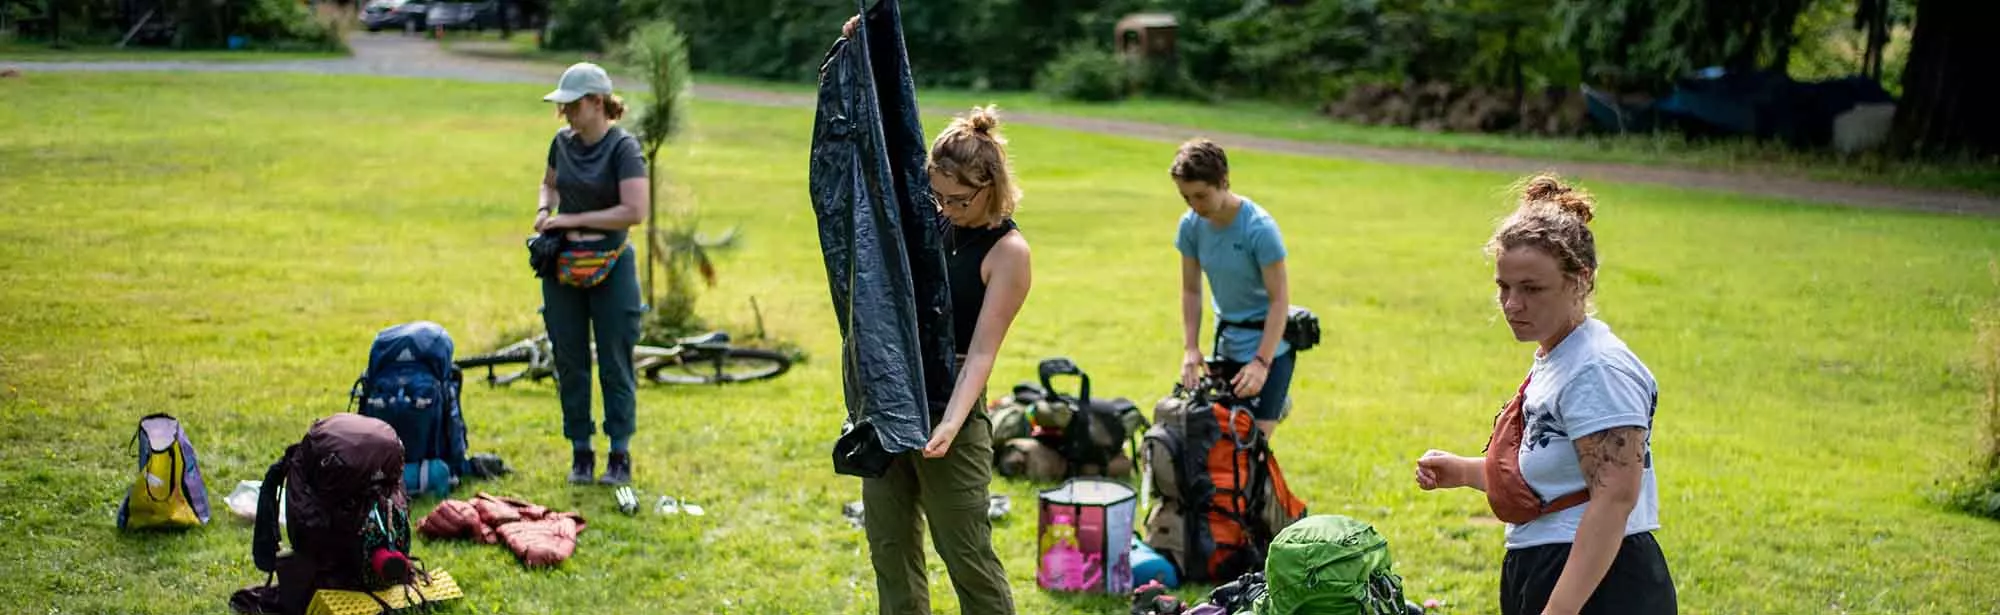 Students unpacking camping gear in a field